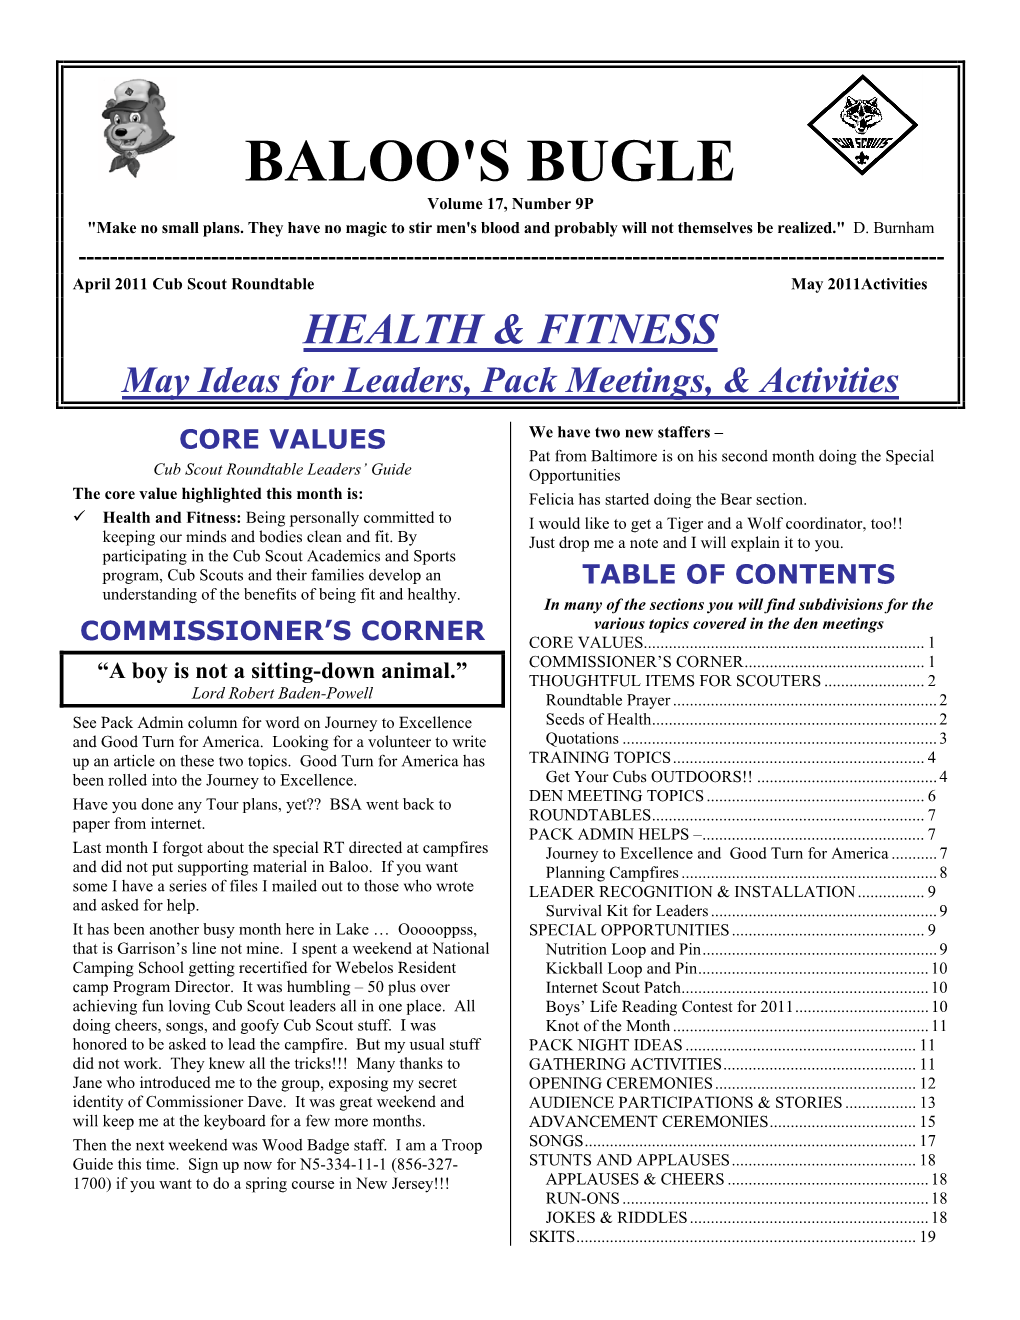 BALOO's BUGLE Volume 17, Number 9P "Make No Small Plans